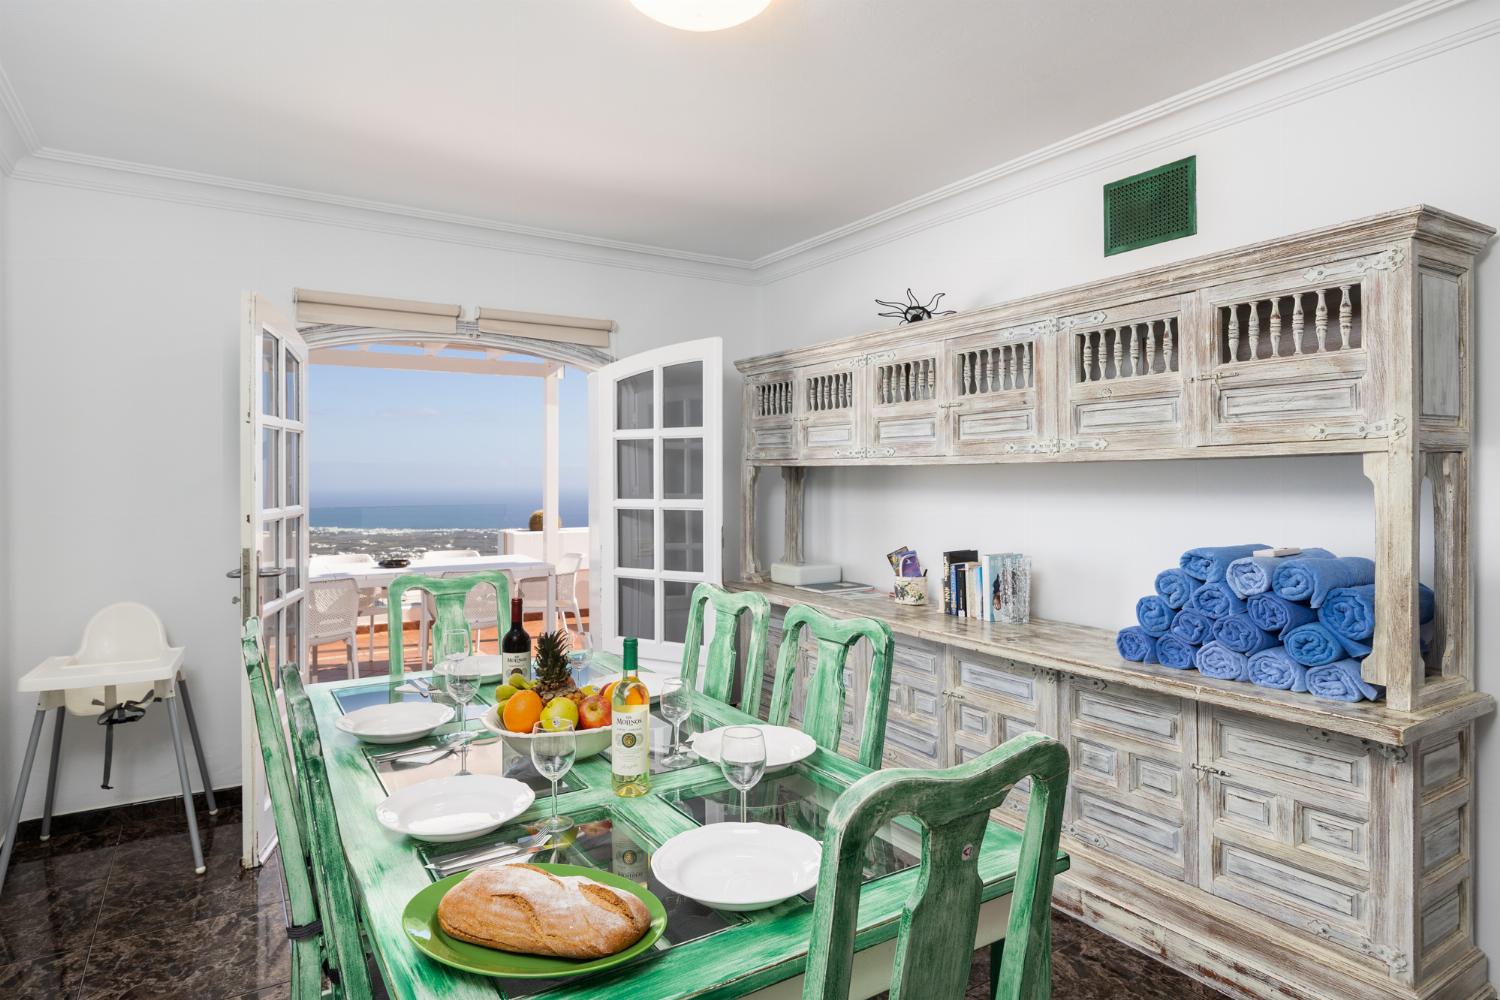 Unit 3: dining area with sea views